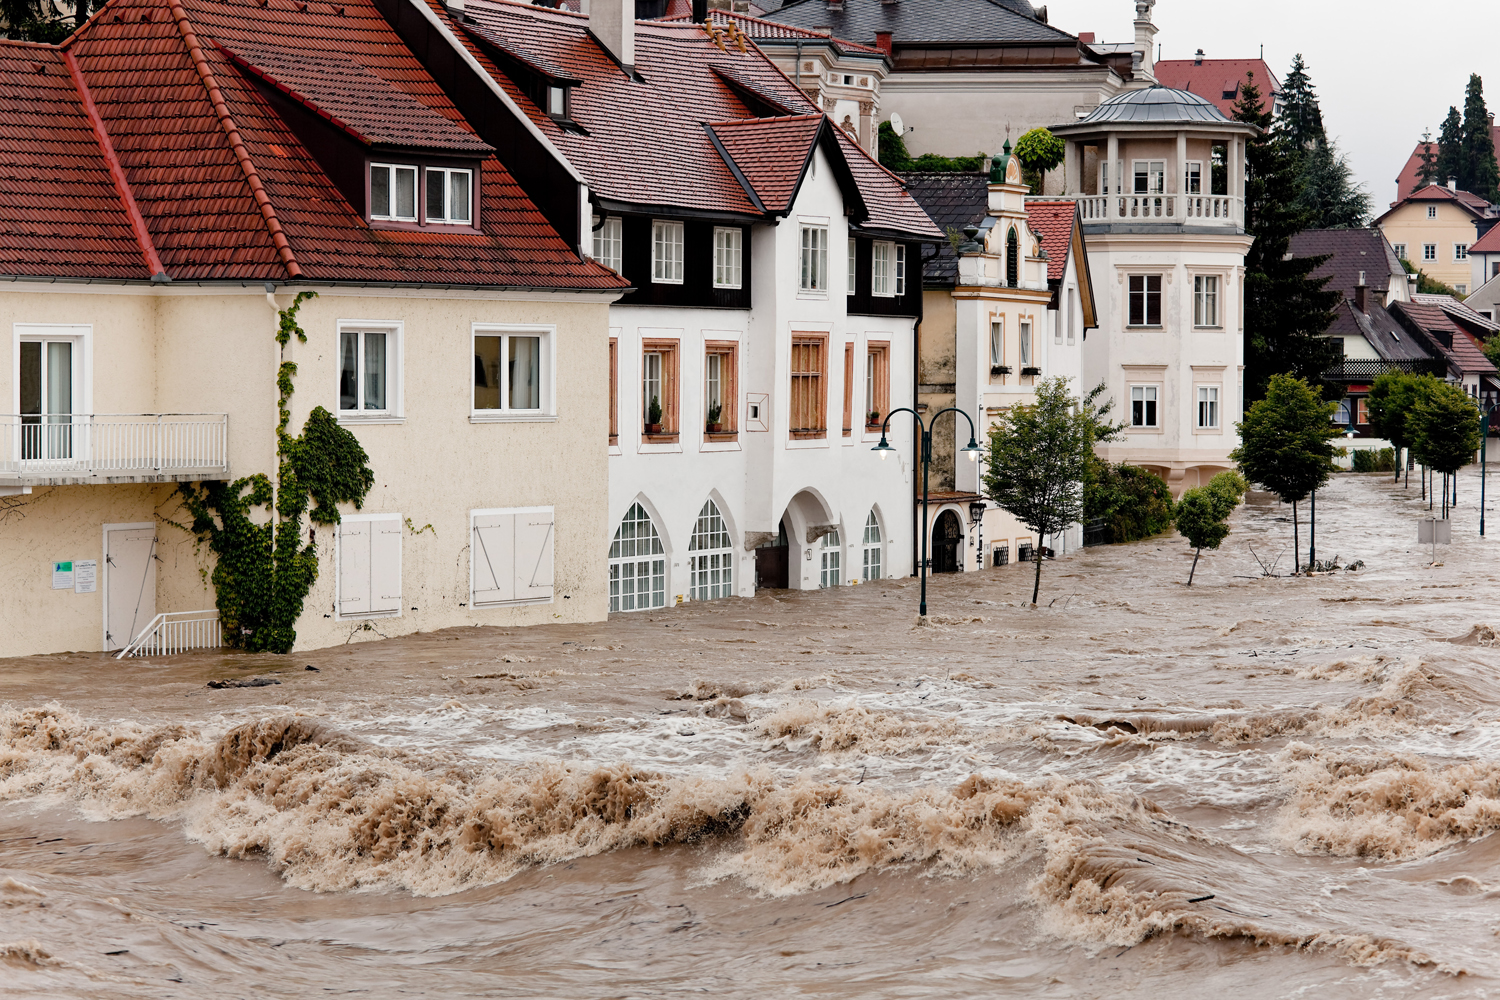 Floods in Europe: A series of unfortunate events